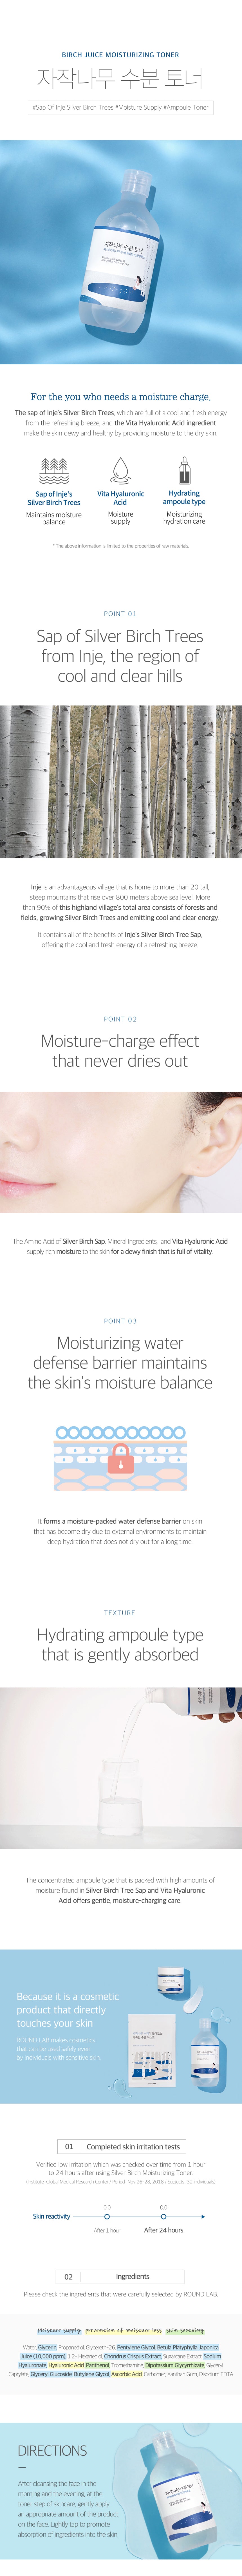 Round Lab Birch Juice Moisturizing Toner helps to hydrate and balance skin.  Formulated with Inje Birch Juice to provide deep hydration to skin. Hyaluronic Acid and Panthenol strengthens skin barrier and soothes skin. Retains skin moisture without stickiness